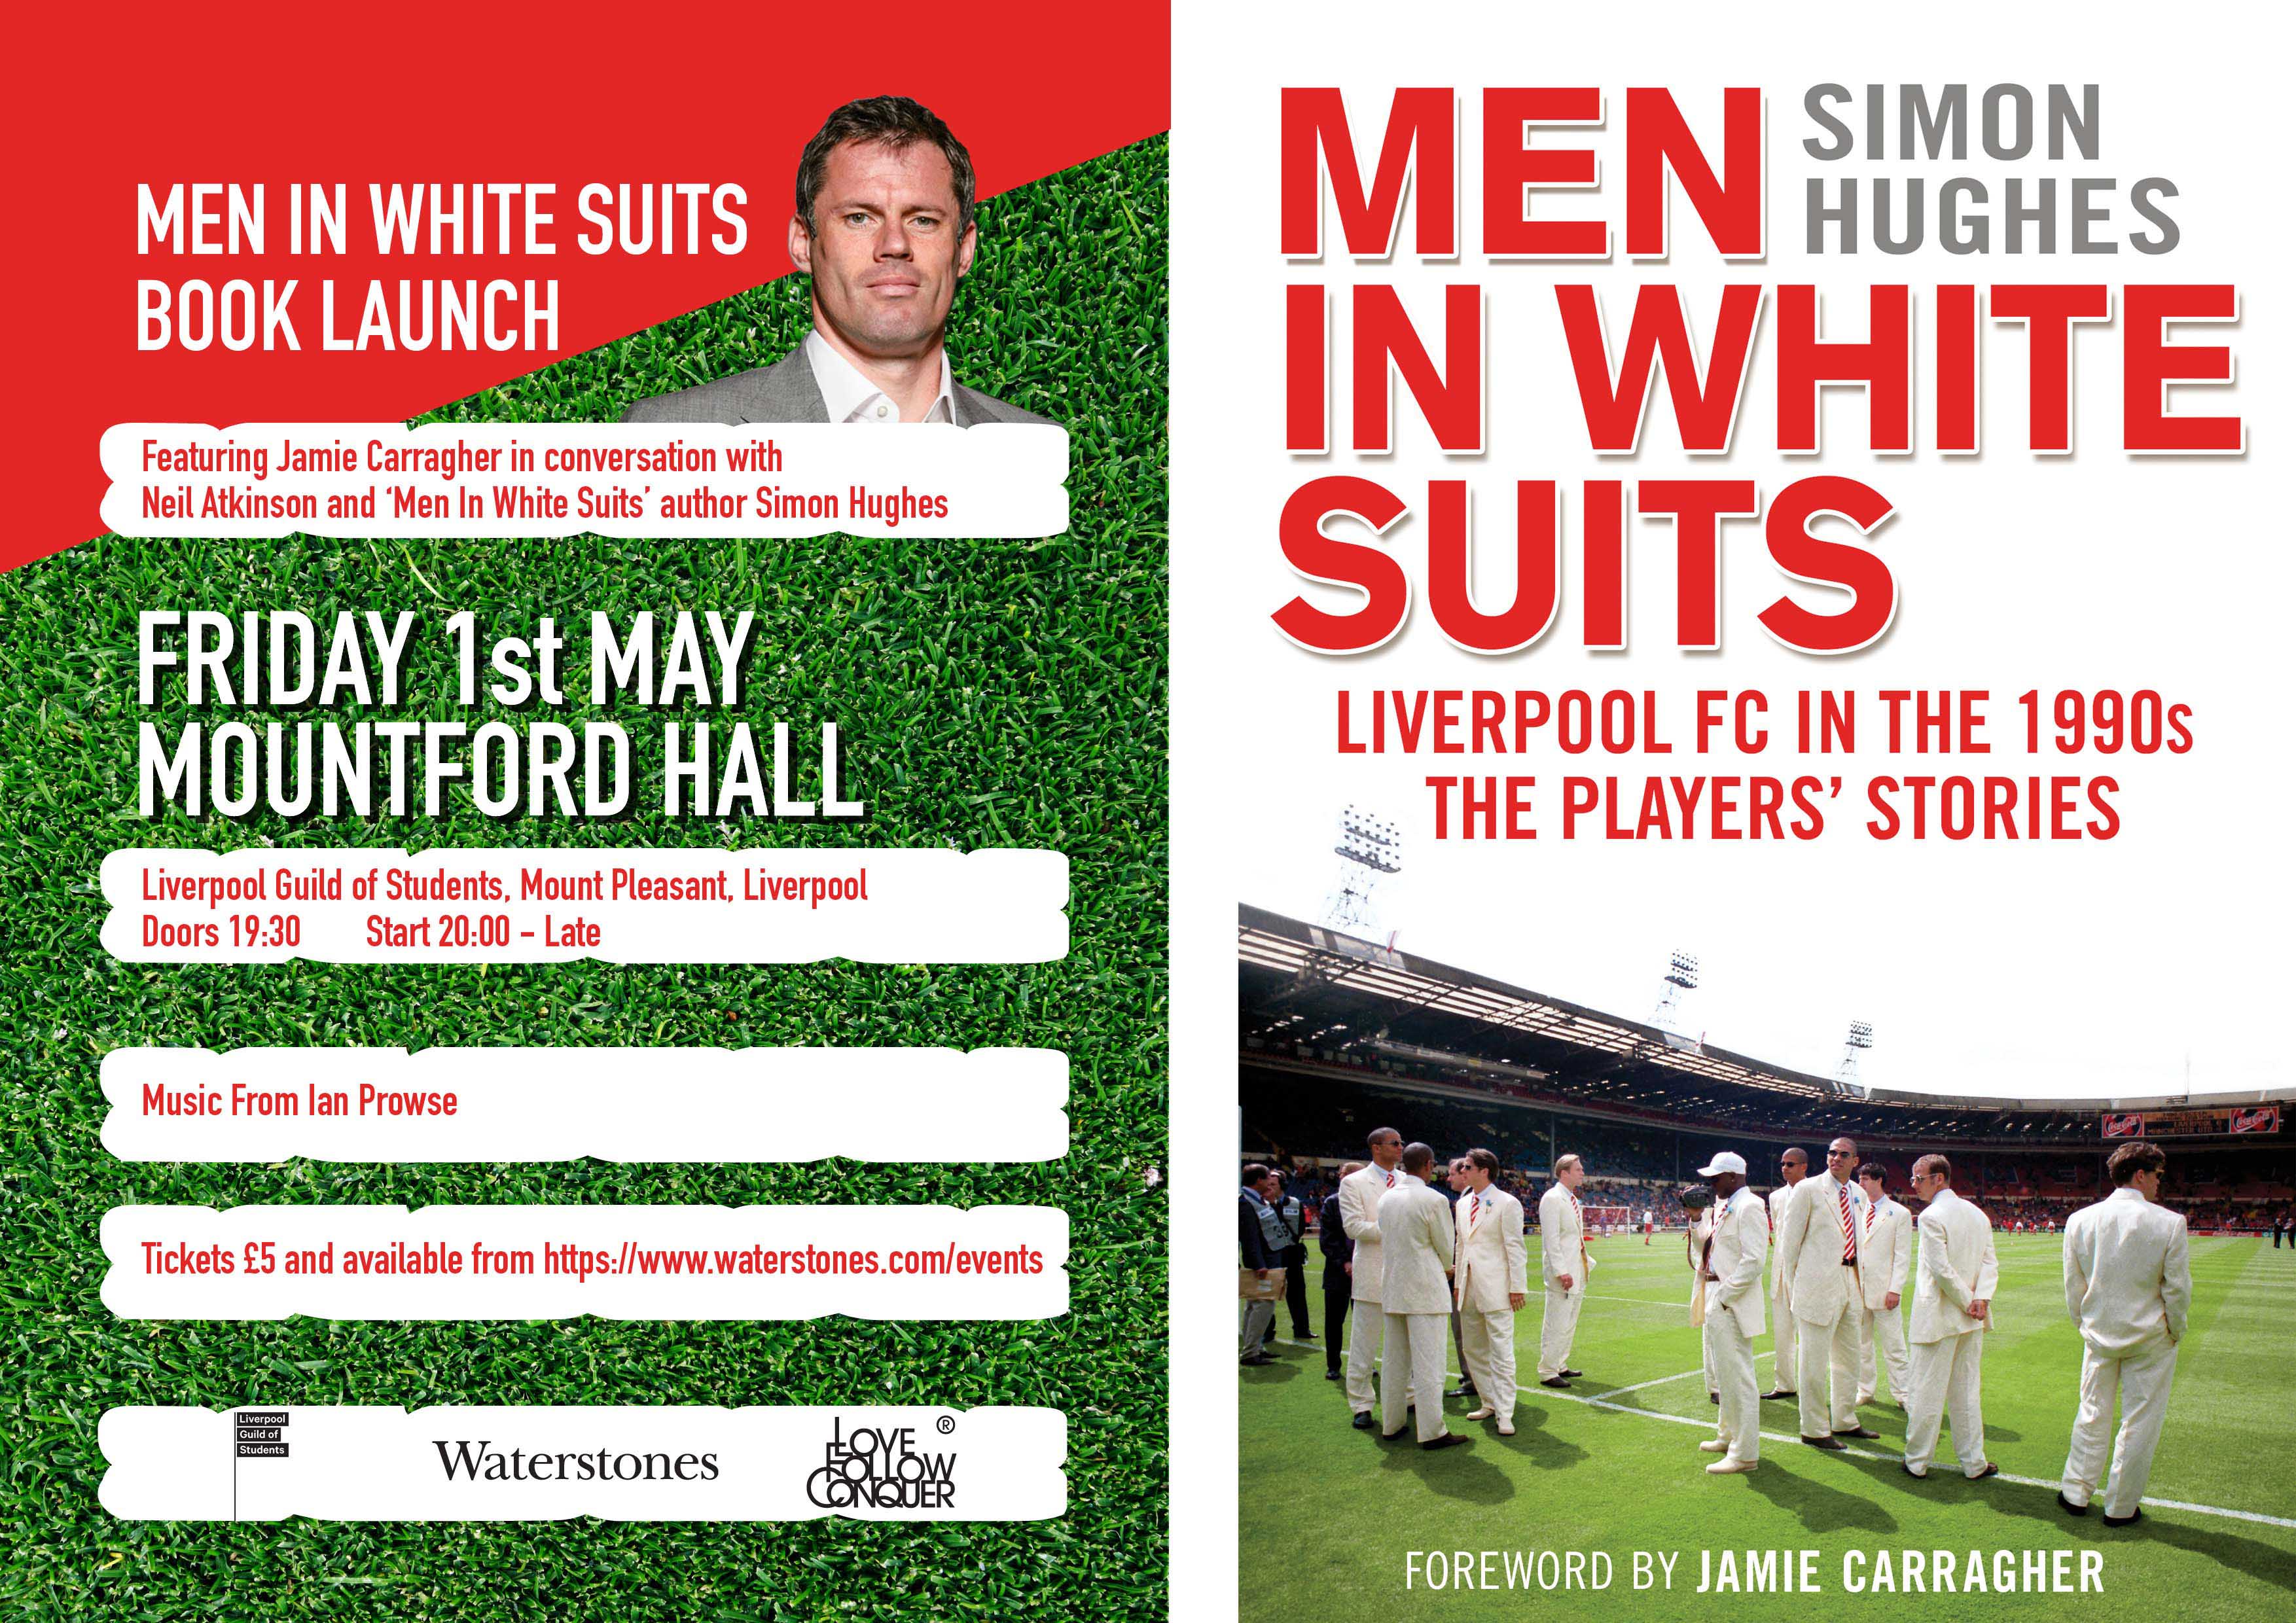 MEN IN WHITE SUITS BOOK LAUNCH WITH JAMIE CARRAGHER